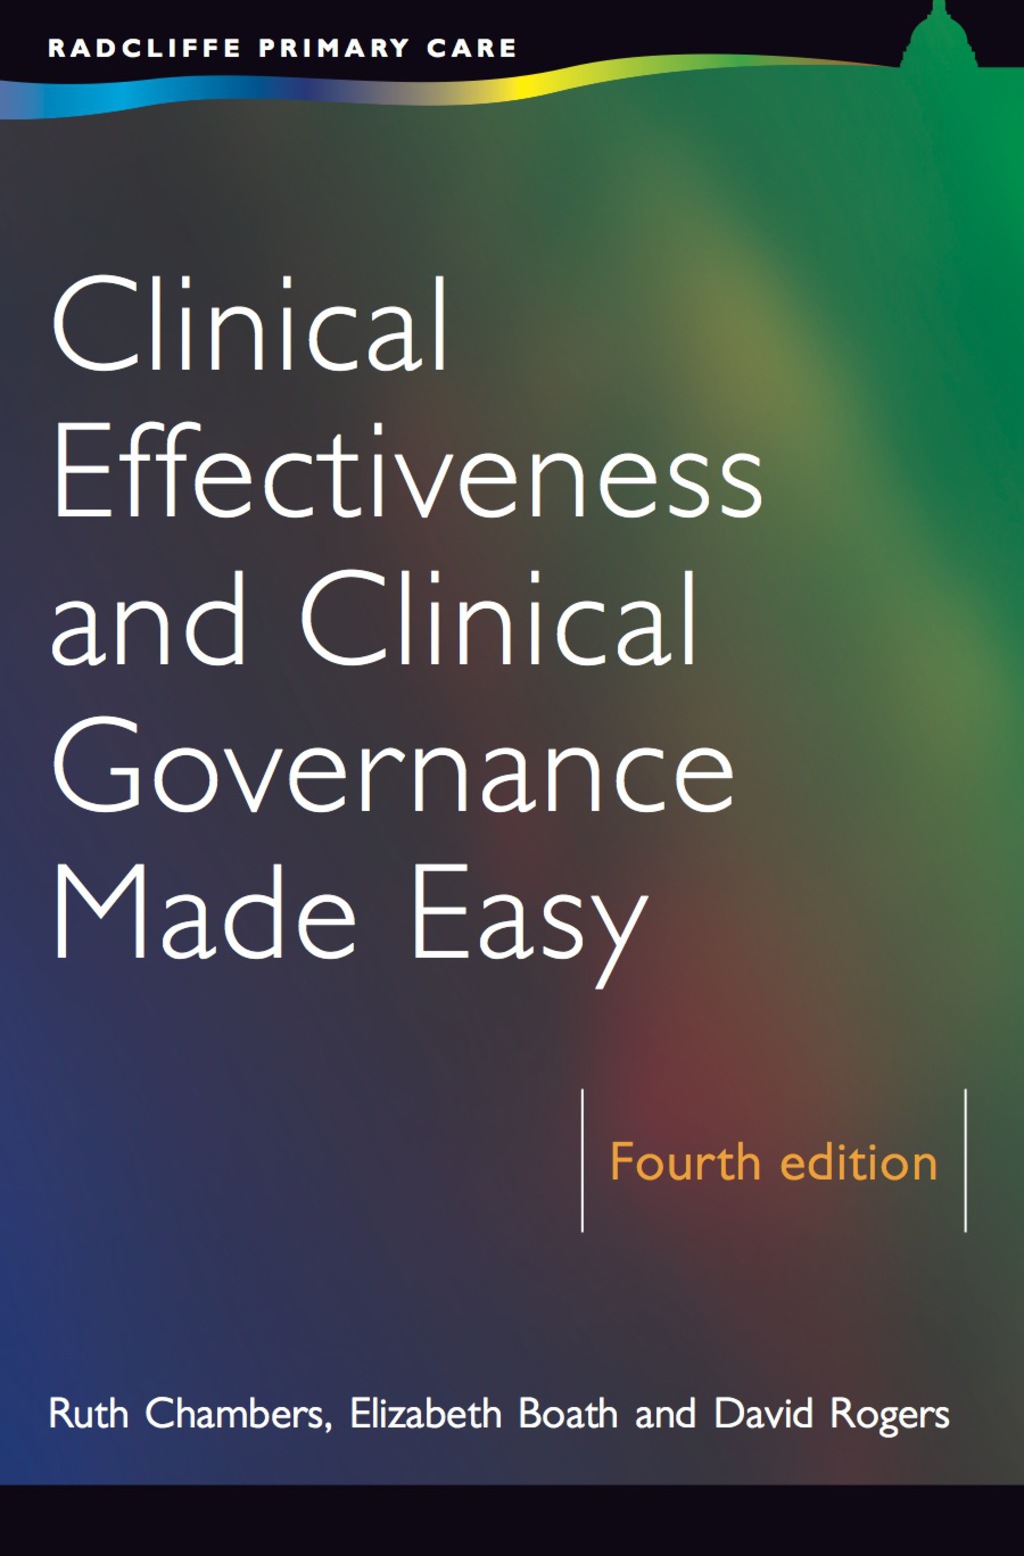 Clinical Effectiveness and Clinical Governance Made Easy - 4th Edition (eBook Rental)